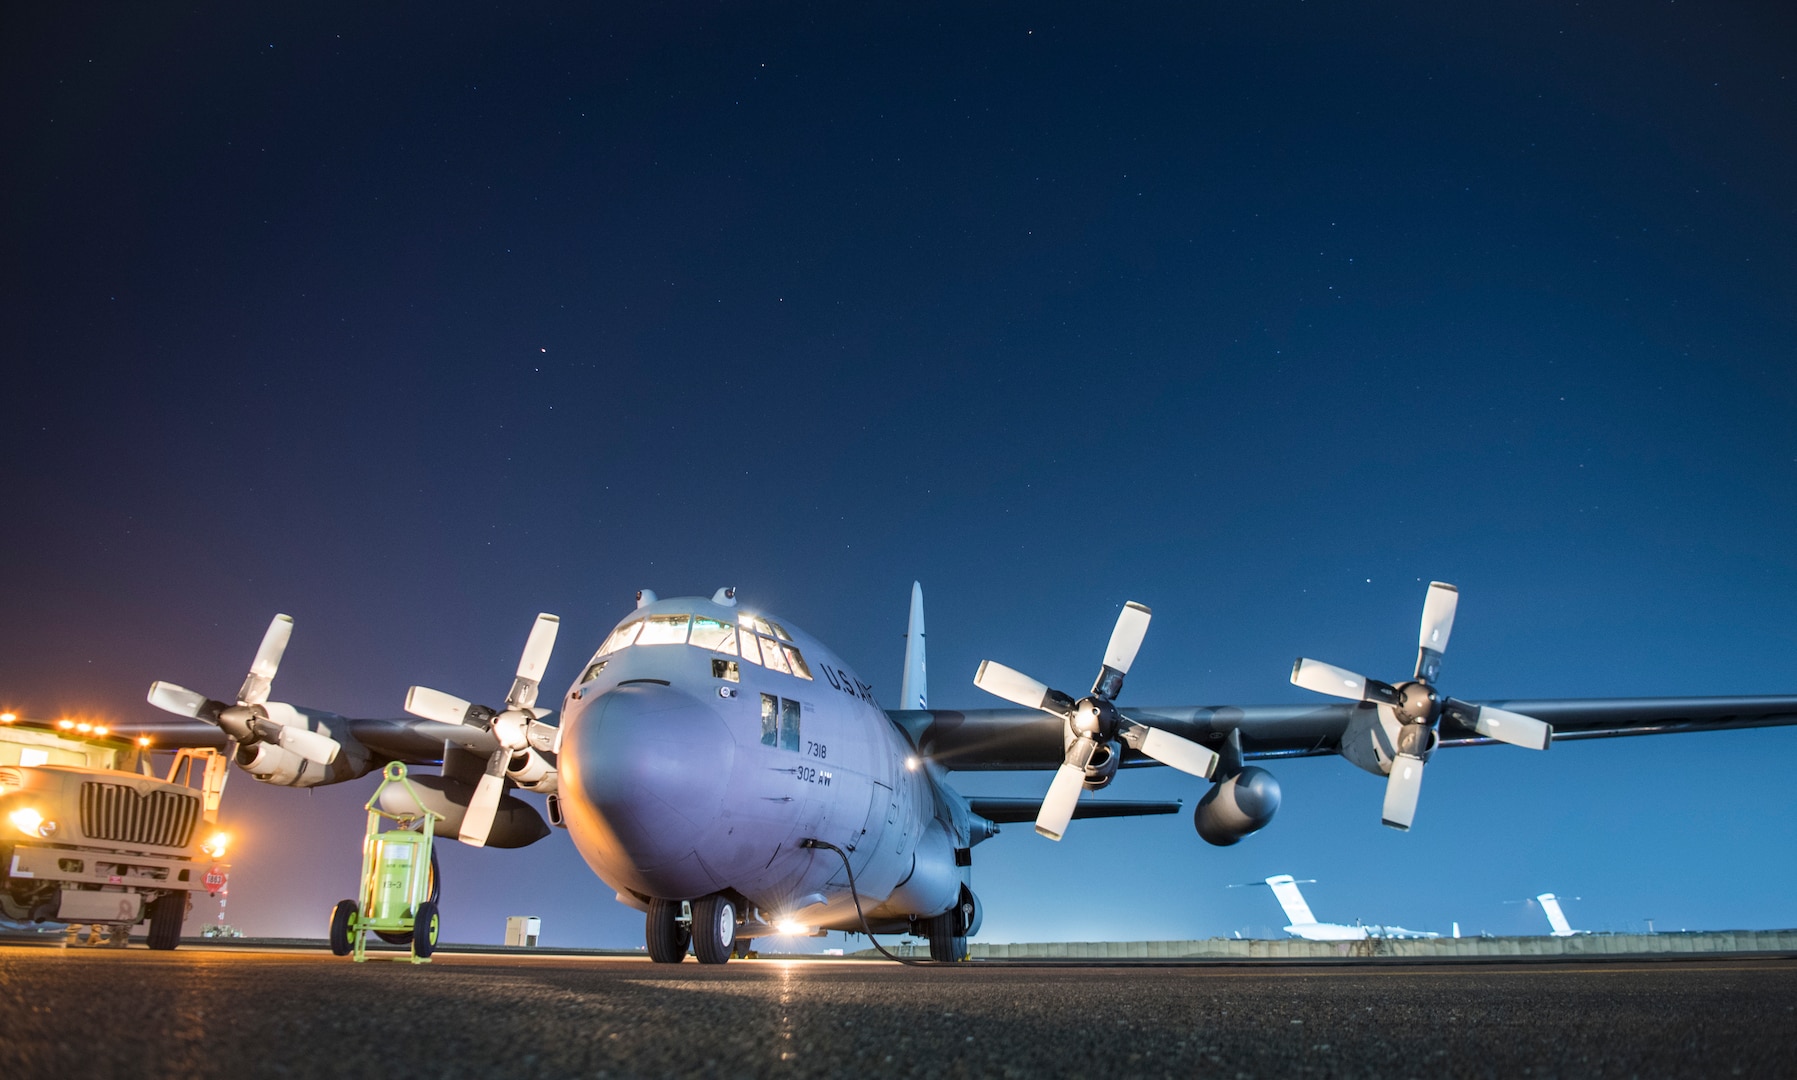 A U.S. Air Force C-130H Hercules assigned to the 746th Expeditionary Airlift Squadron receives fuel Nov. 6, 2018, at an undisclosed location. U.S. and Coalition aircraft provide unmatched combat capability in support of U.S. Central Command military objectives. (U.S. Air Force photo/Staff Sgt. Clayton Cupit)